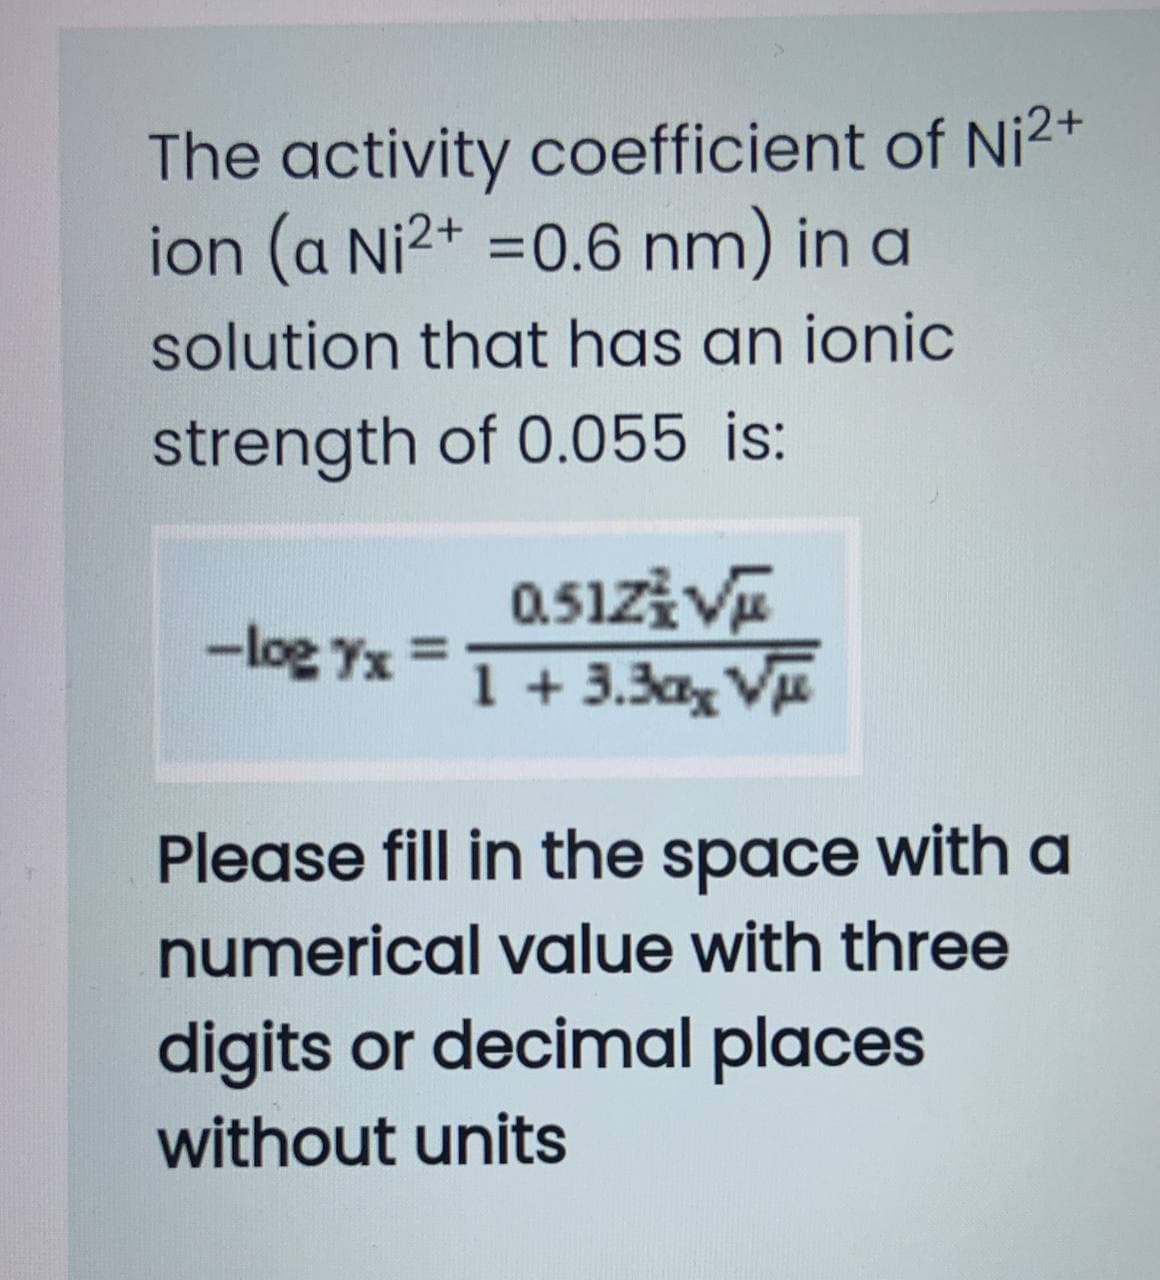 The activity coefficient of Ni2+
ion (a Ni2+ =0.6 nm) in a
solution that has an ionic
strength of 0.055 is:
-log Yx =1+3.3ax V
Please fill in the space with a
numerical value with three
digits or decimal places
without units
